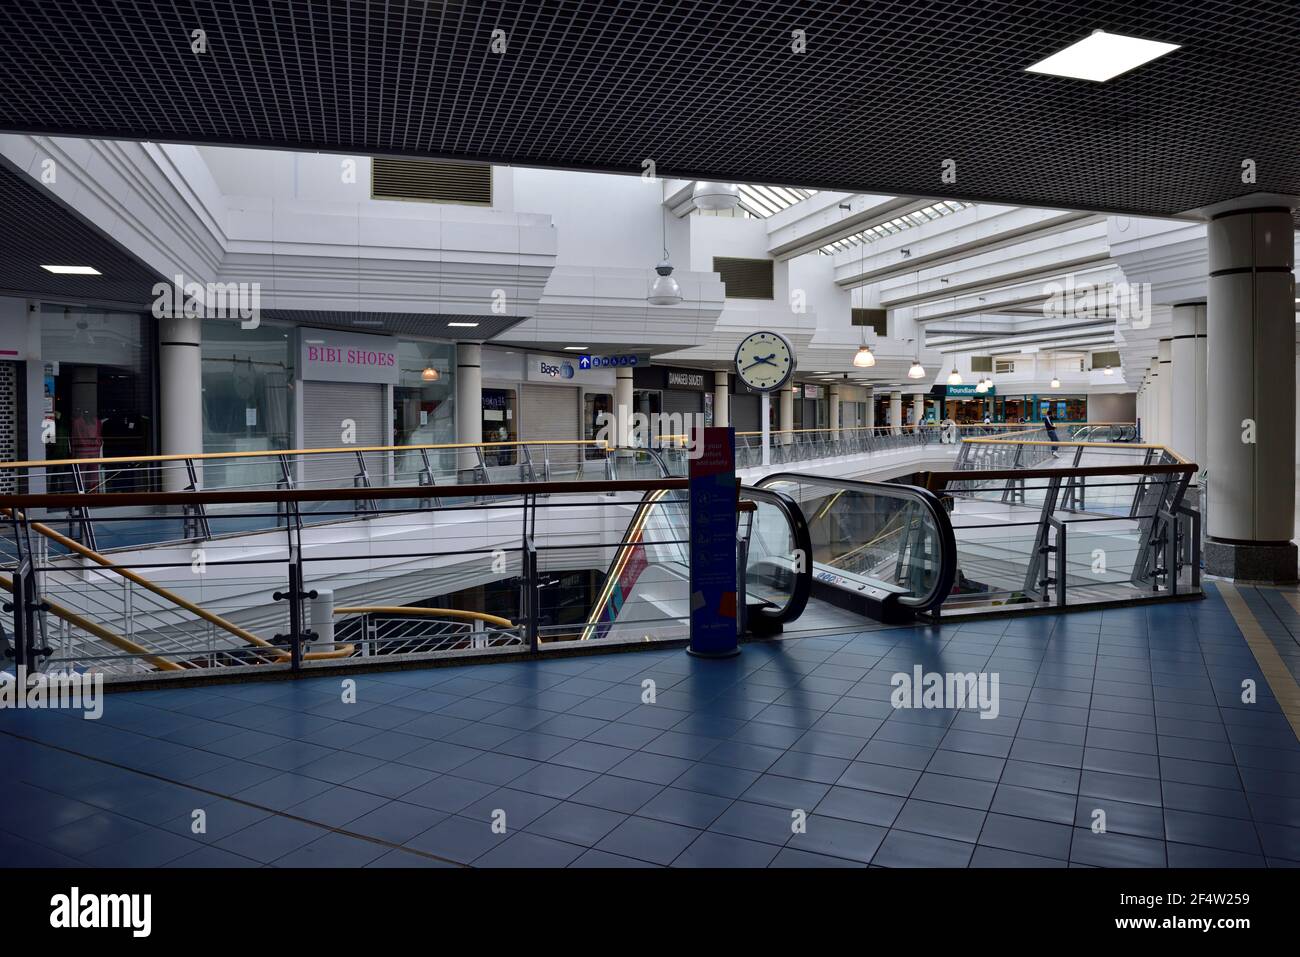 Inside large normally busy shopping centre nearly empty mid afternoon weekend with shops closed during lockdown due to Covid-19 pandemic, UK Stock Photo